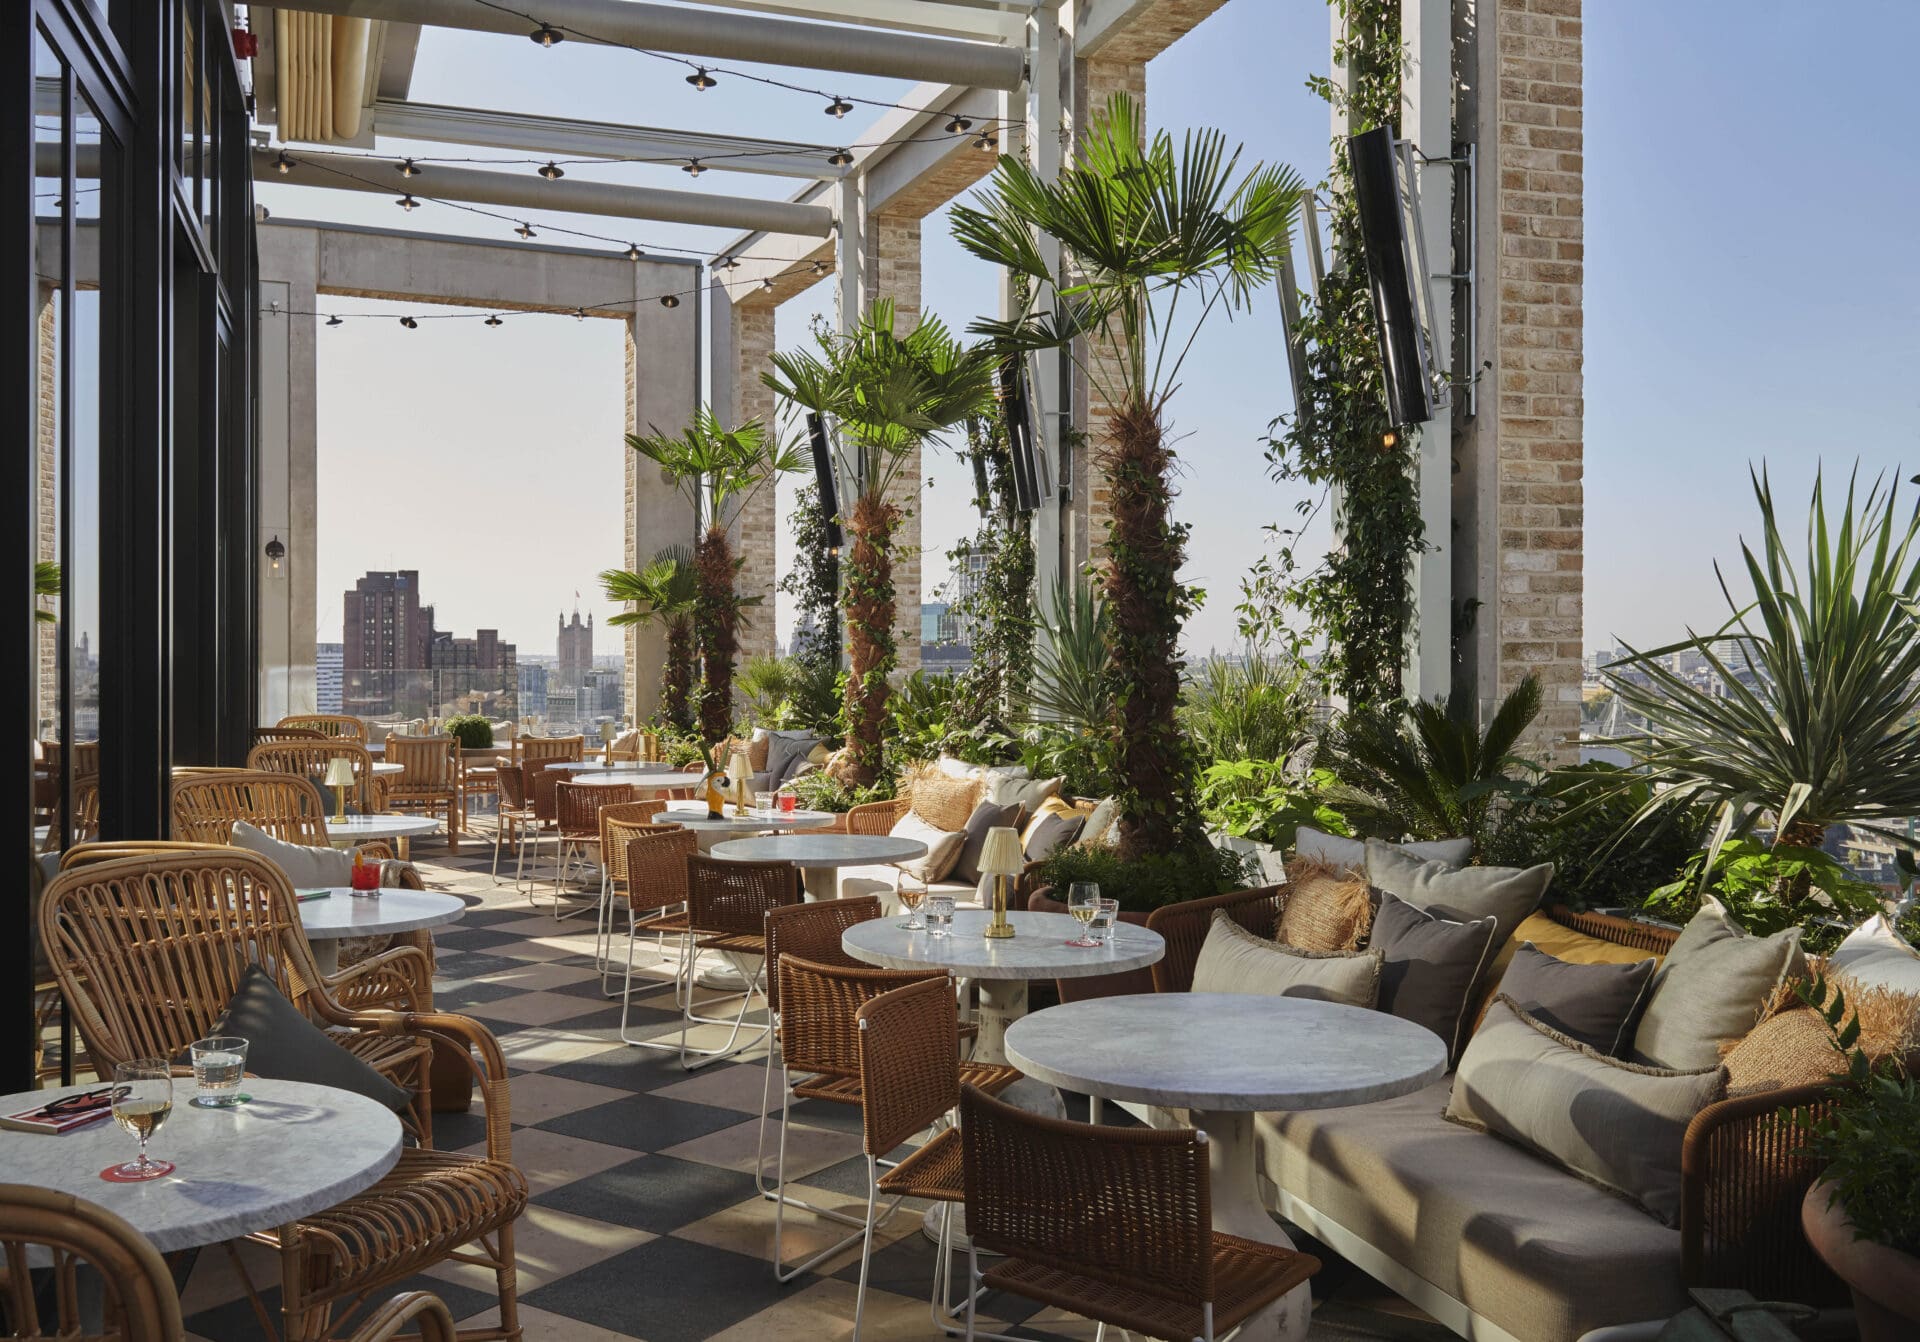 The best outdoor restaurants in London | The plant-lined, open-air terrace at rooftop restaurant Seabird located in The Hoxton, Southwark